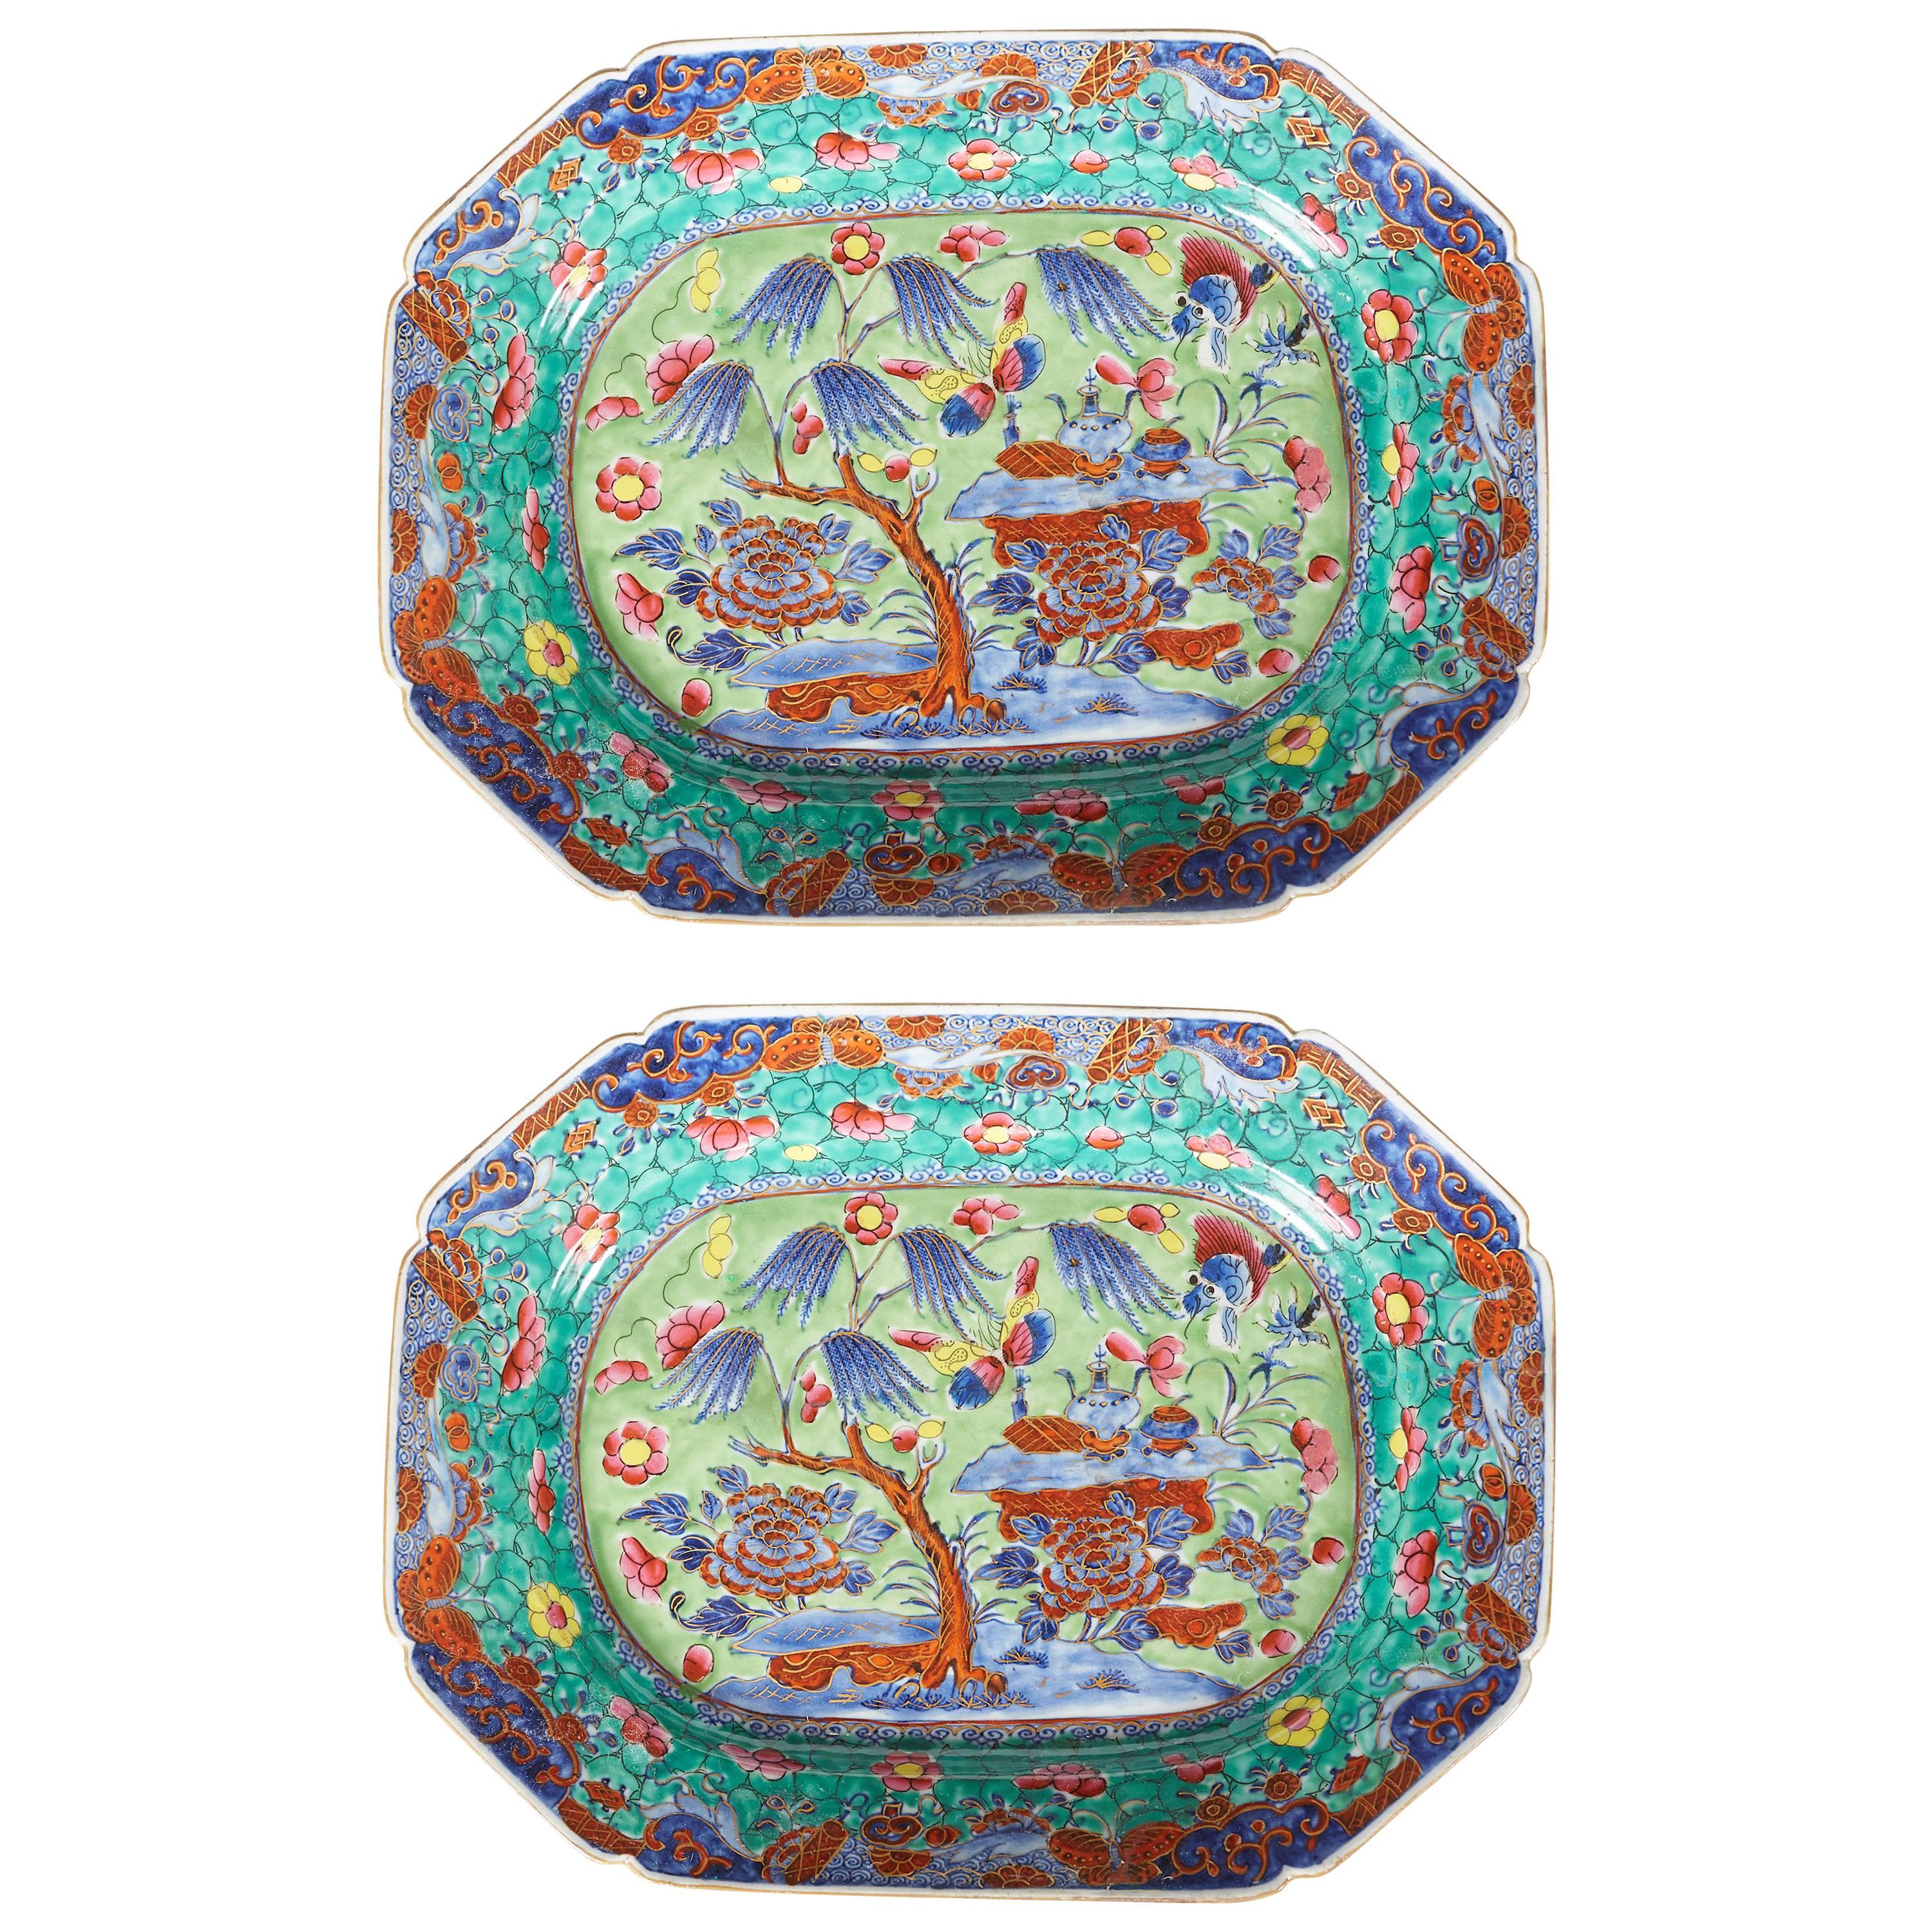 Pair of 18th Century Chinese Export Clobbered Platters